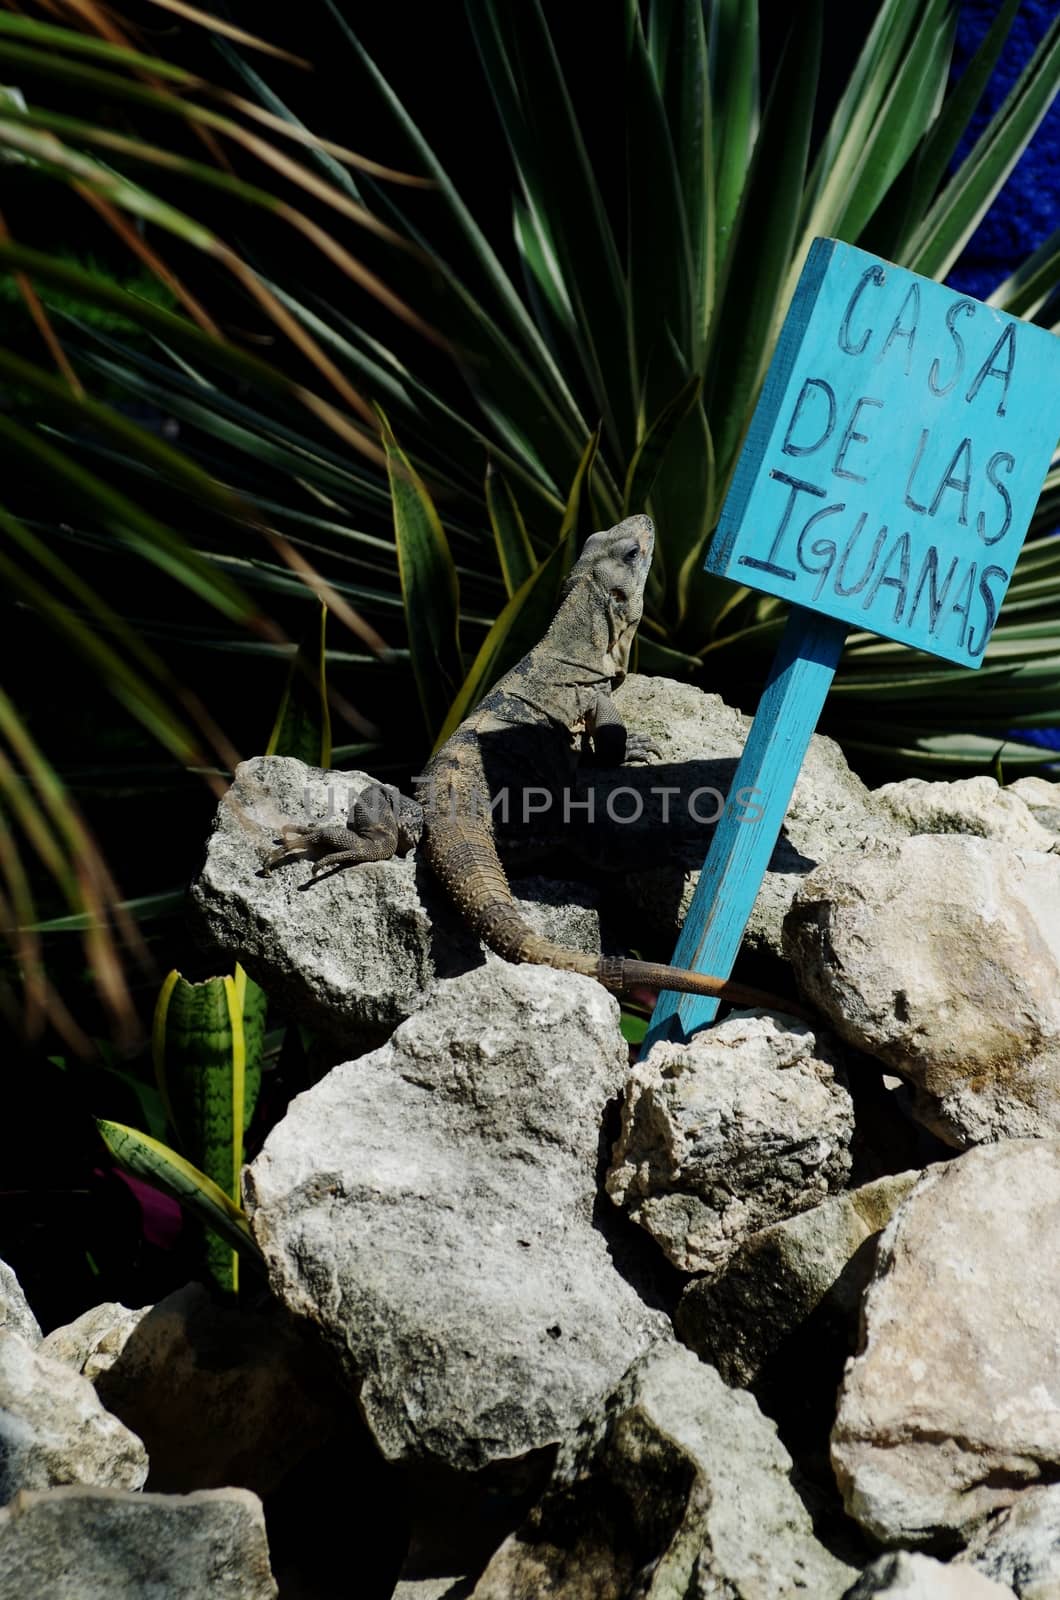 An iguana rests on top of a pile of rocks with a blue sign indicating its home.